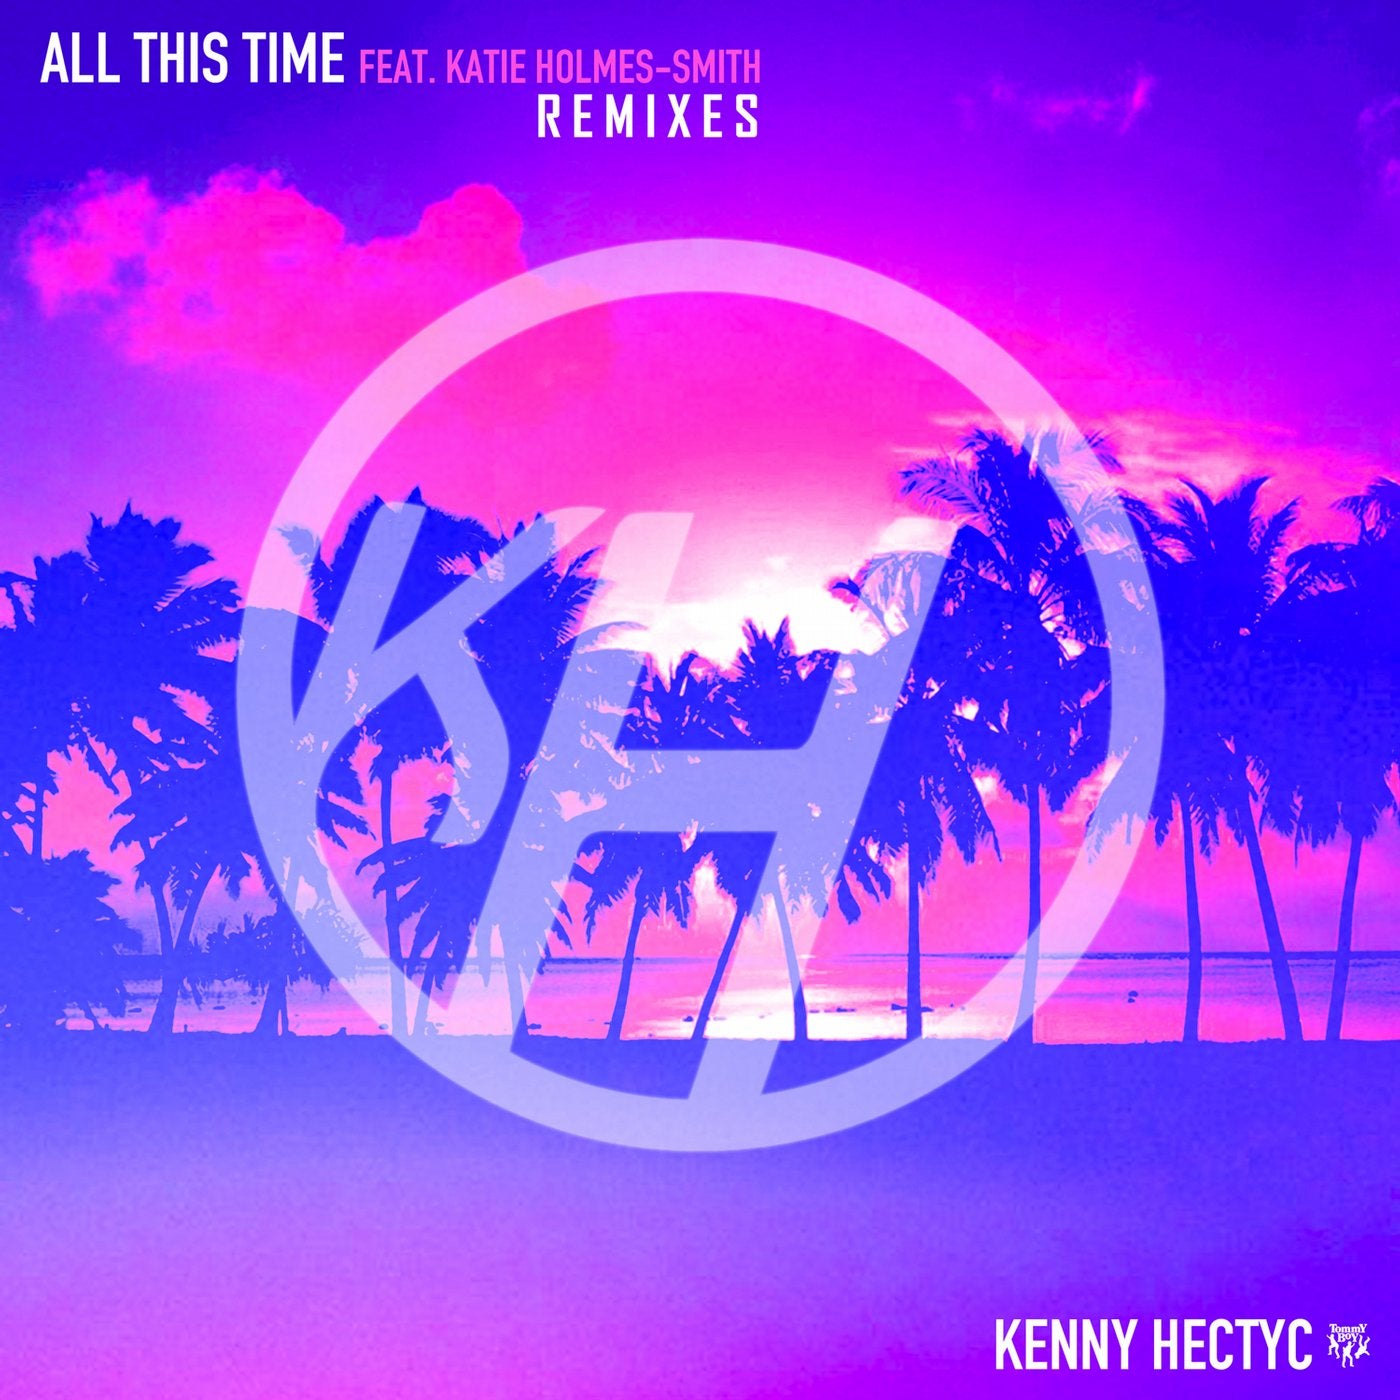 All This Time (feat. Katie Holmes-Smith) [Remixes]